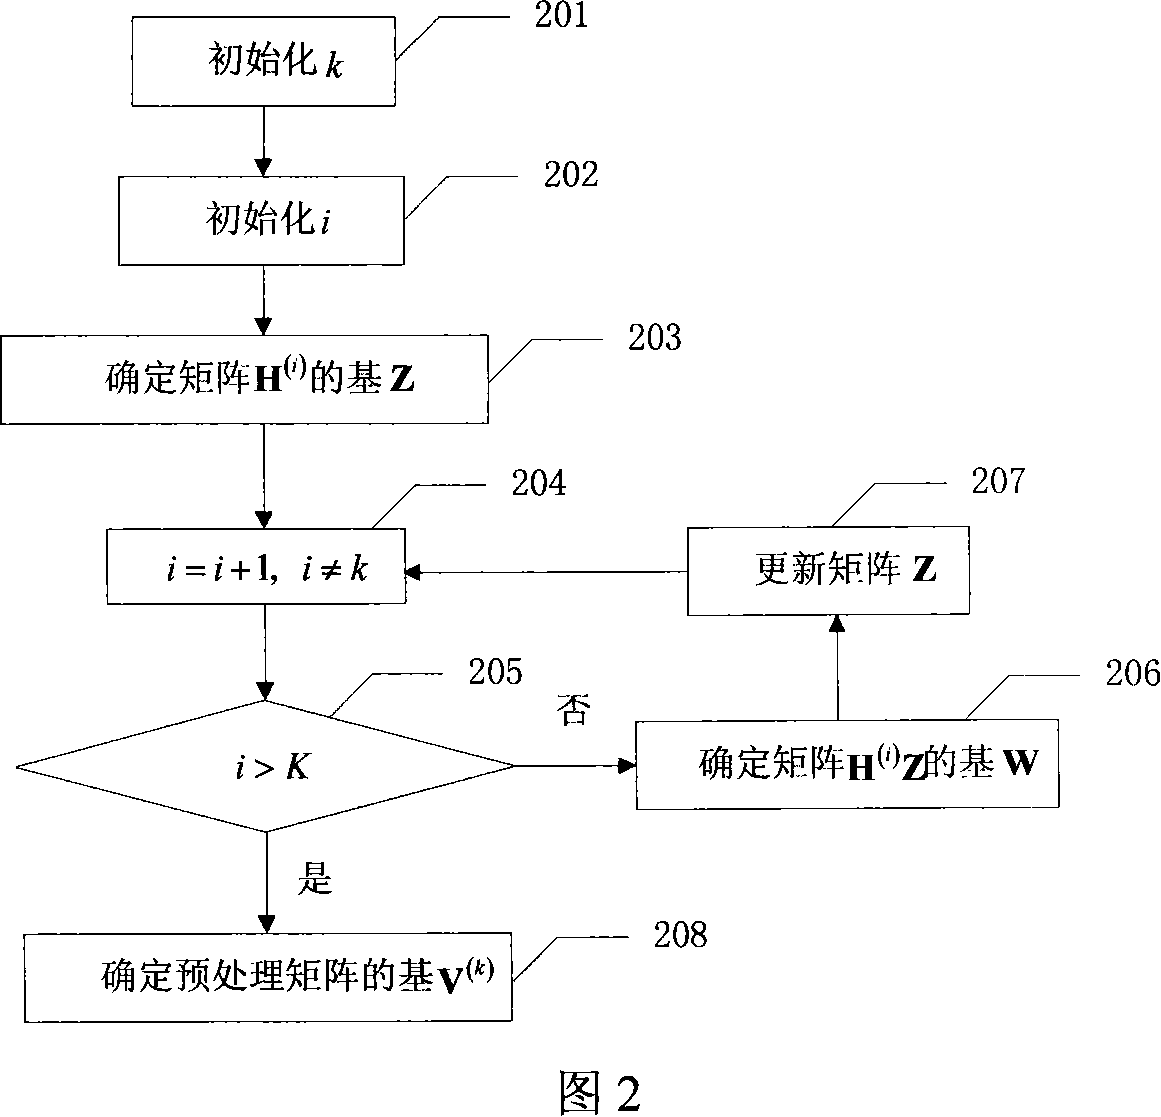 Selection preprocess method for downlink link antenna of multi-user MIMO system